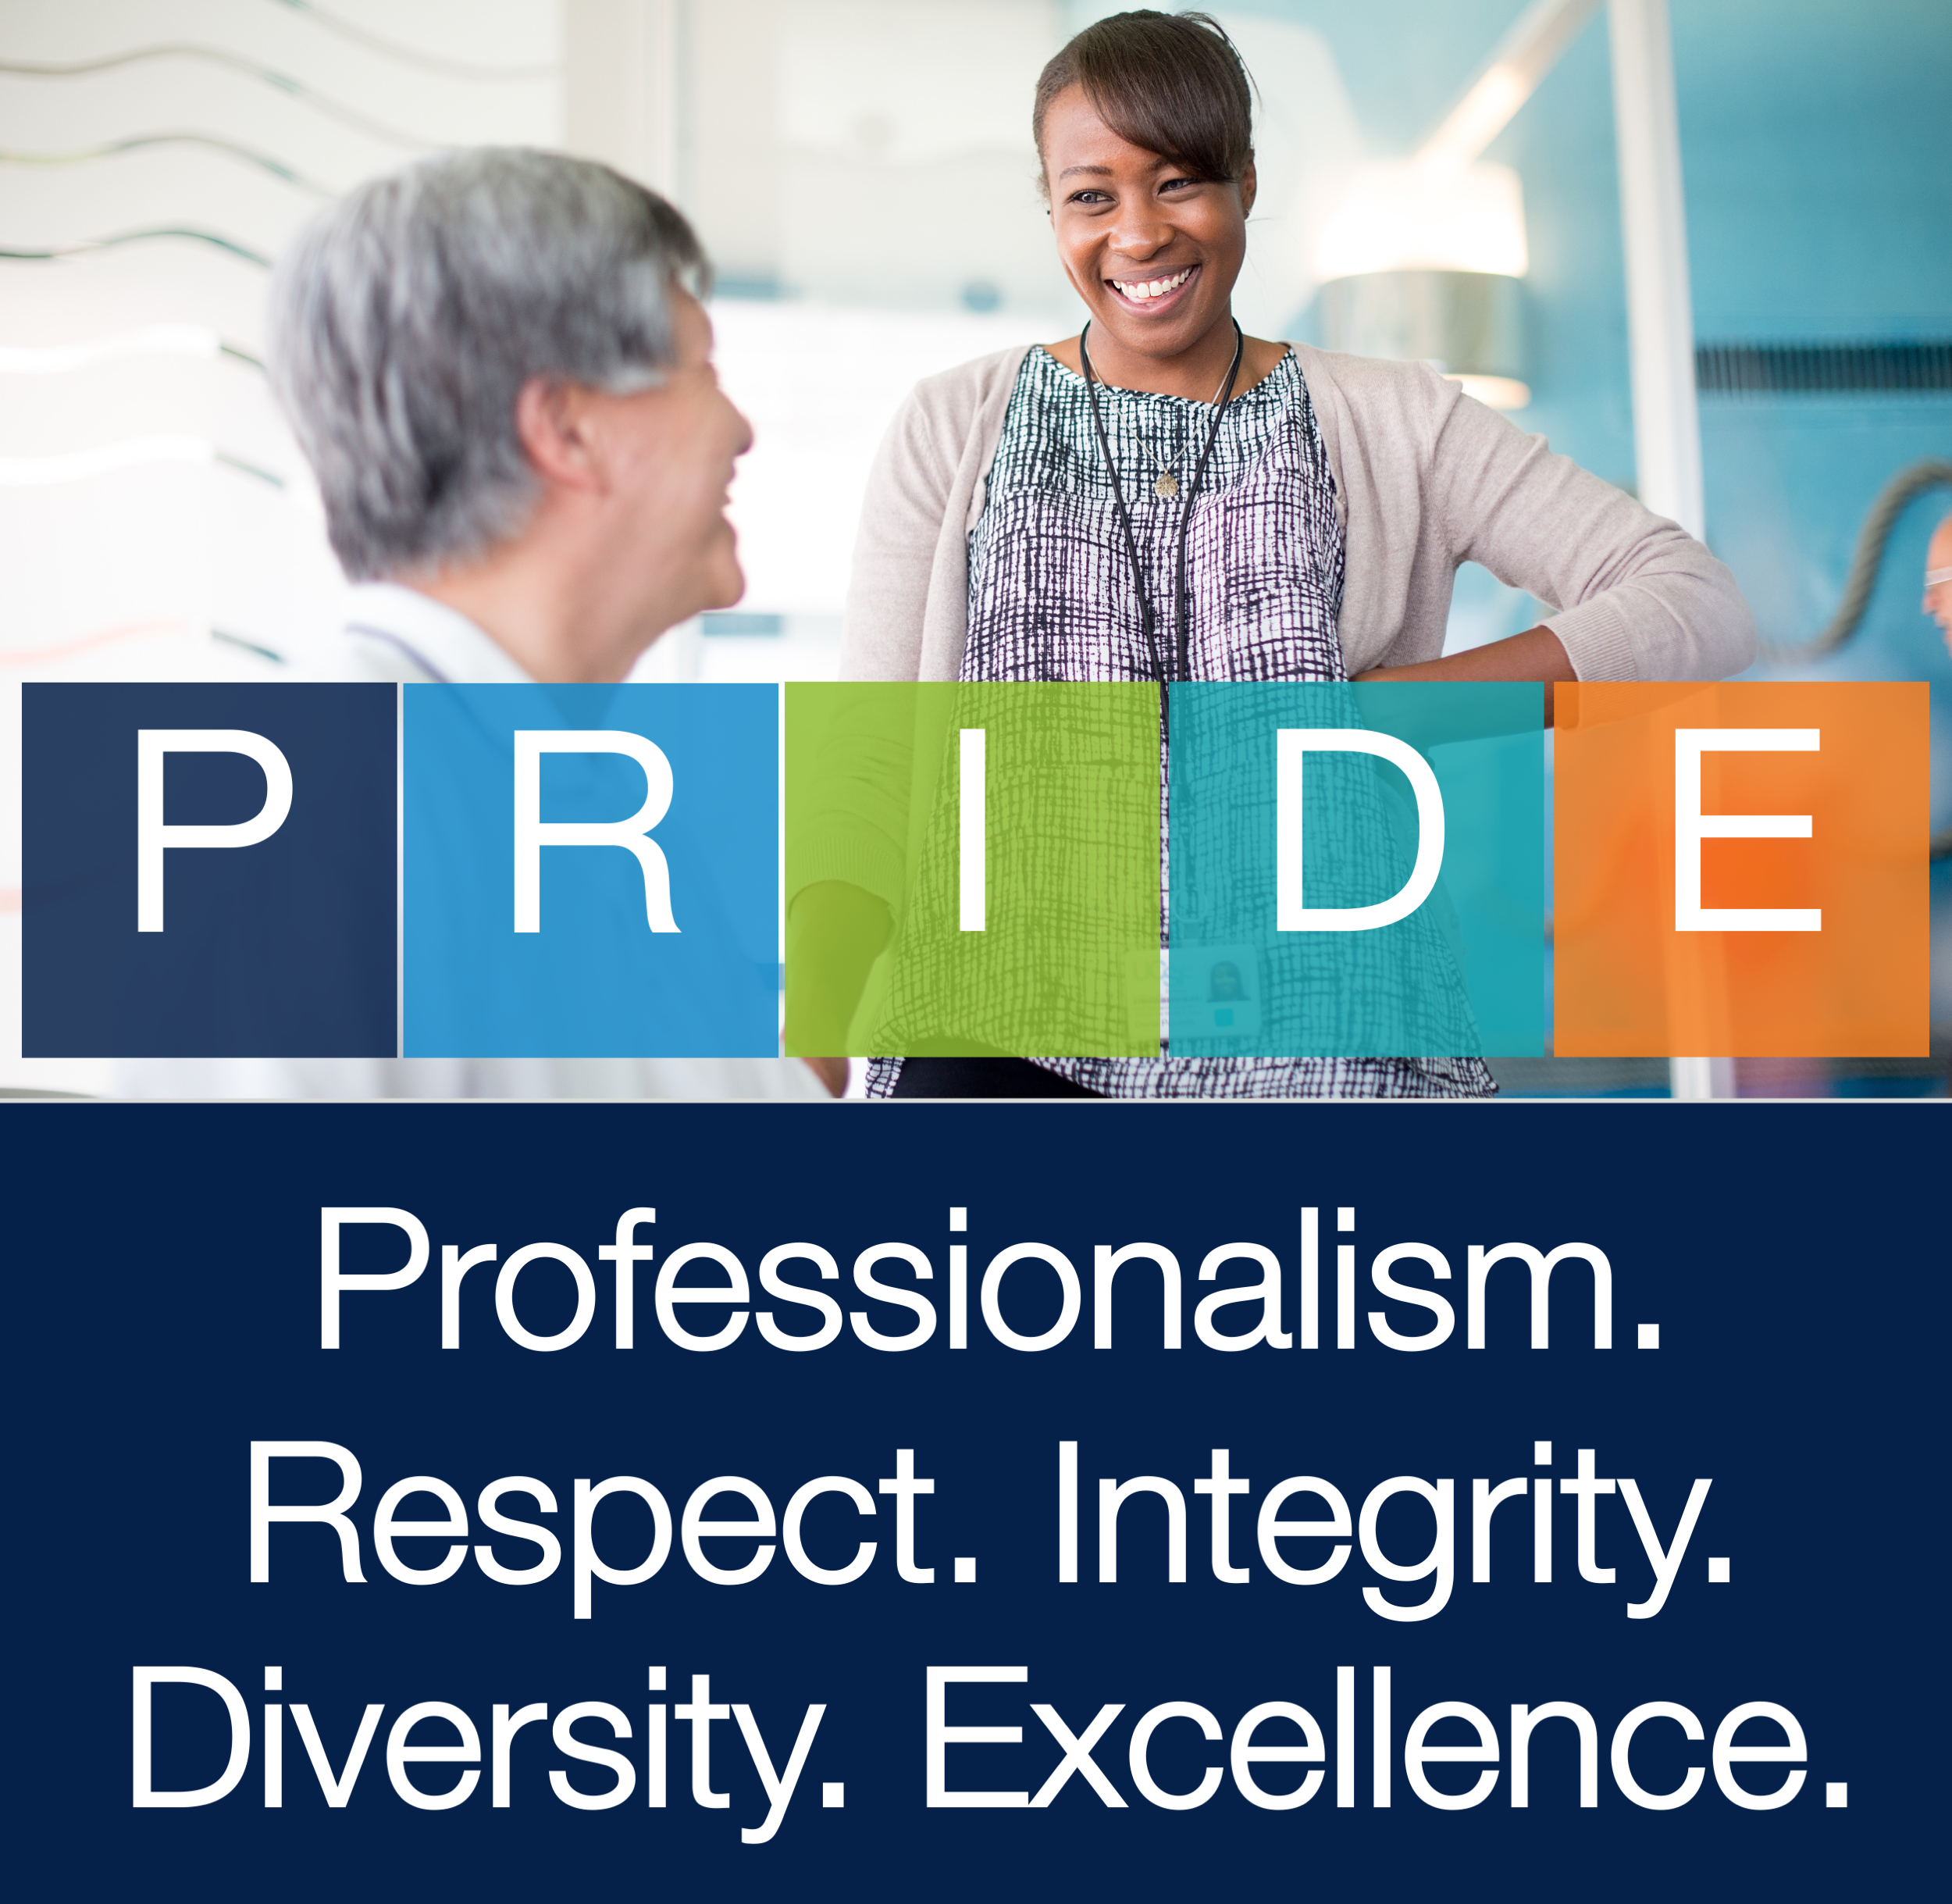 Professionalism. Respect. Integrity. Diversity. Excellence.